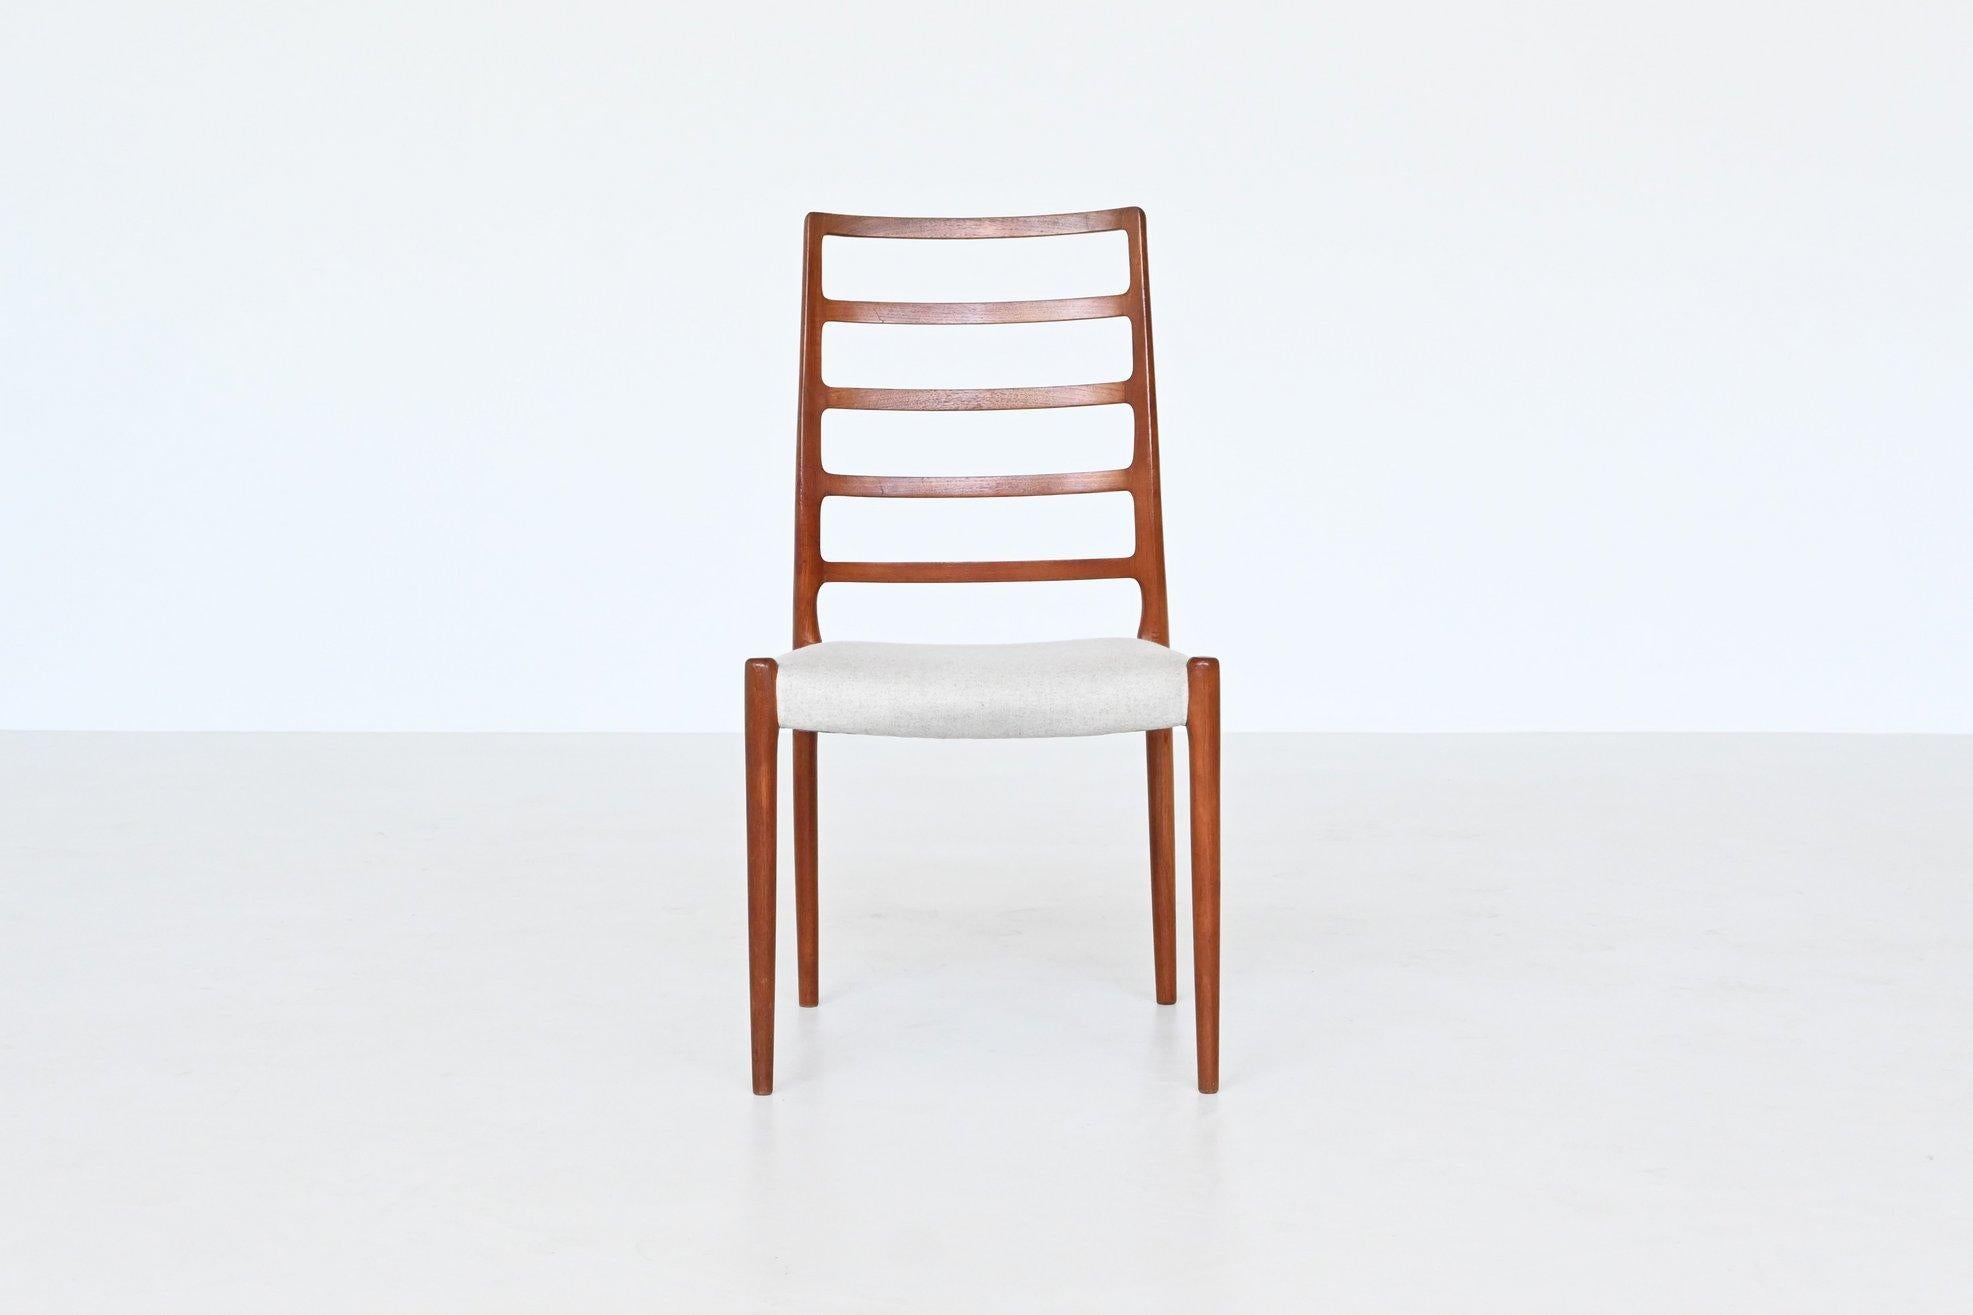 Beautiful shaped dining chair model 82 designed by Niels Otto Møller and manufactured by J.L. Møller Mobelfabrik, Denmark 1971. These elegant shaped chair is made of solid teak wood and the seat is upholstered with light grey wool fabric. The wood